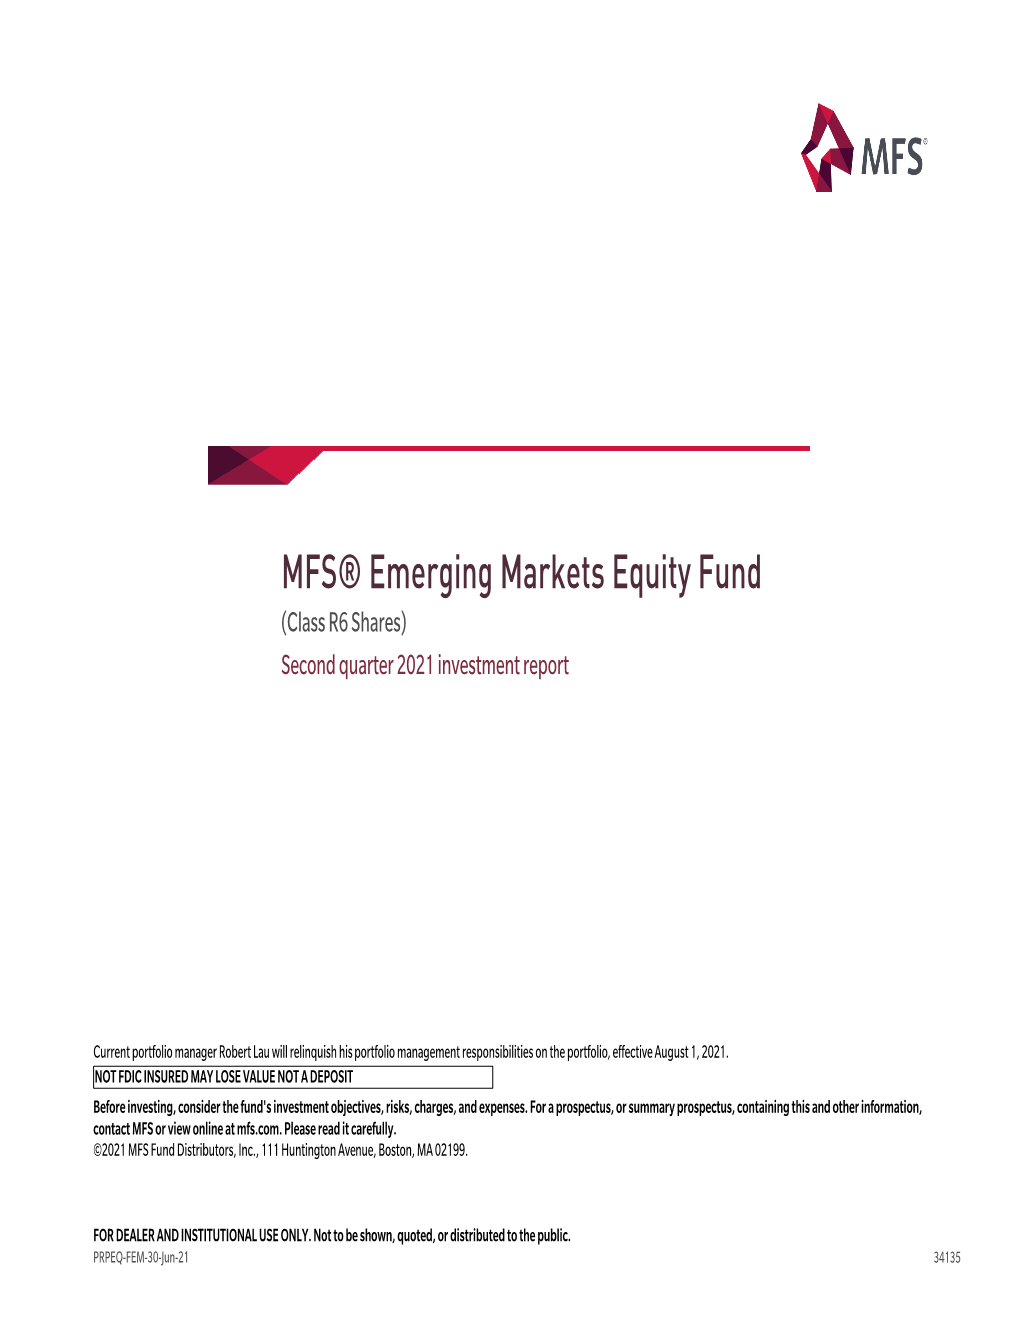 MFS® Emerging Markets Equity Fund (Class R6 Shares) Second Quarter 2021 Investment Report